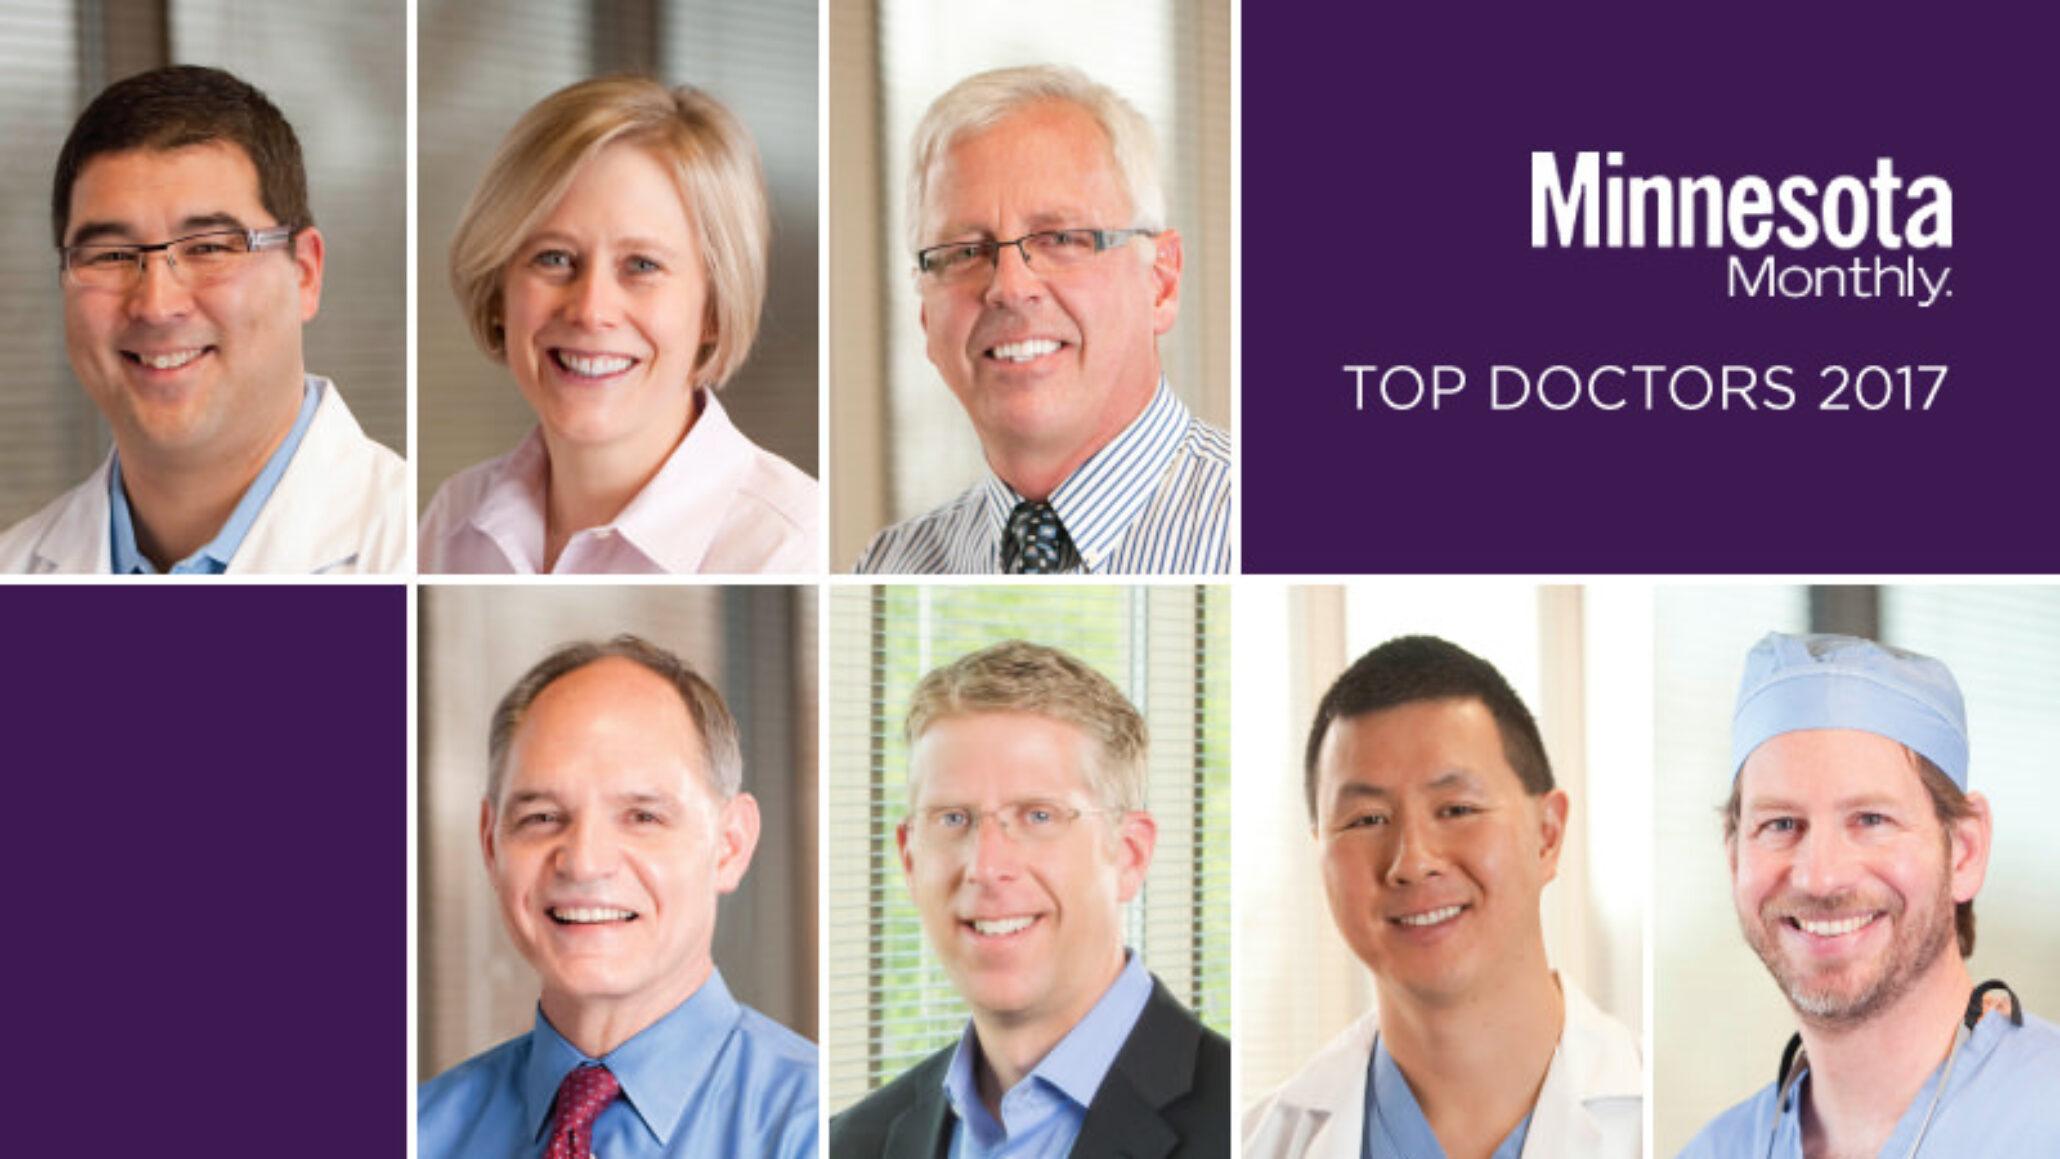 Minnesota Monthly Magazine Names Seven Summit Physicians Among Their